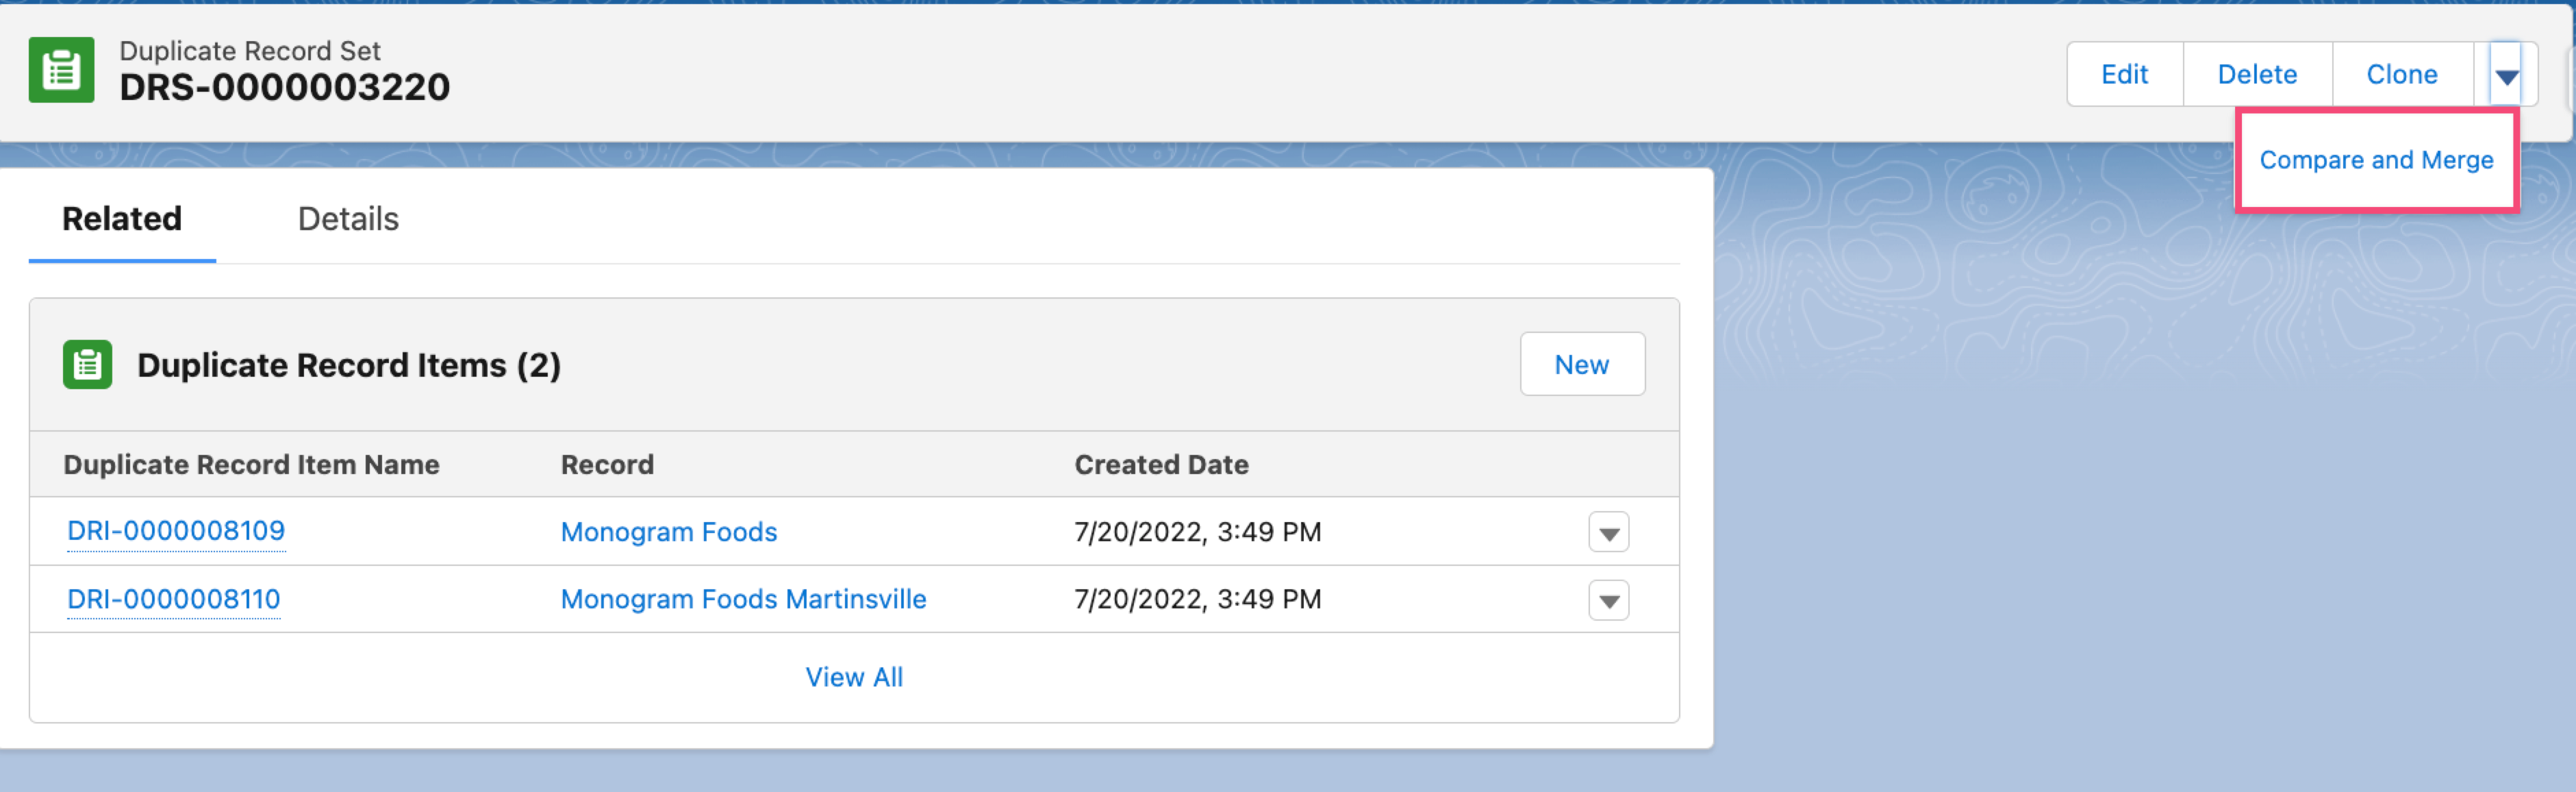 Screenshot of a Salesforce Duplicate Record Set with Duplicate Record Items and the Compare and Merge button